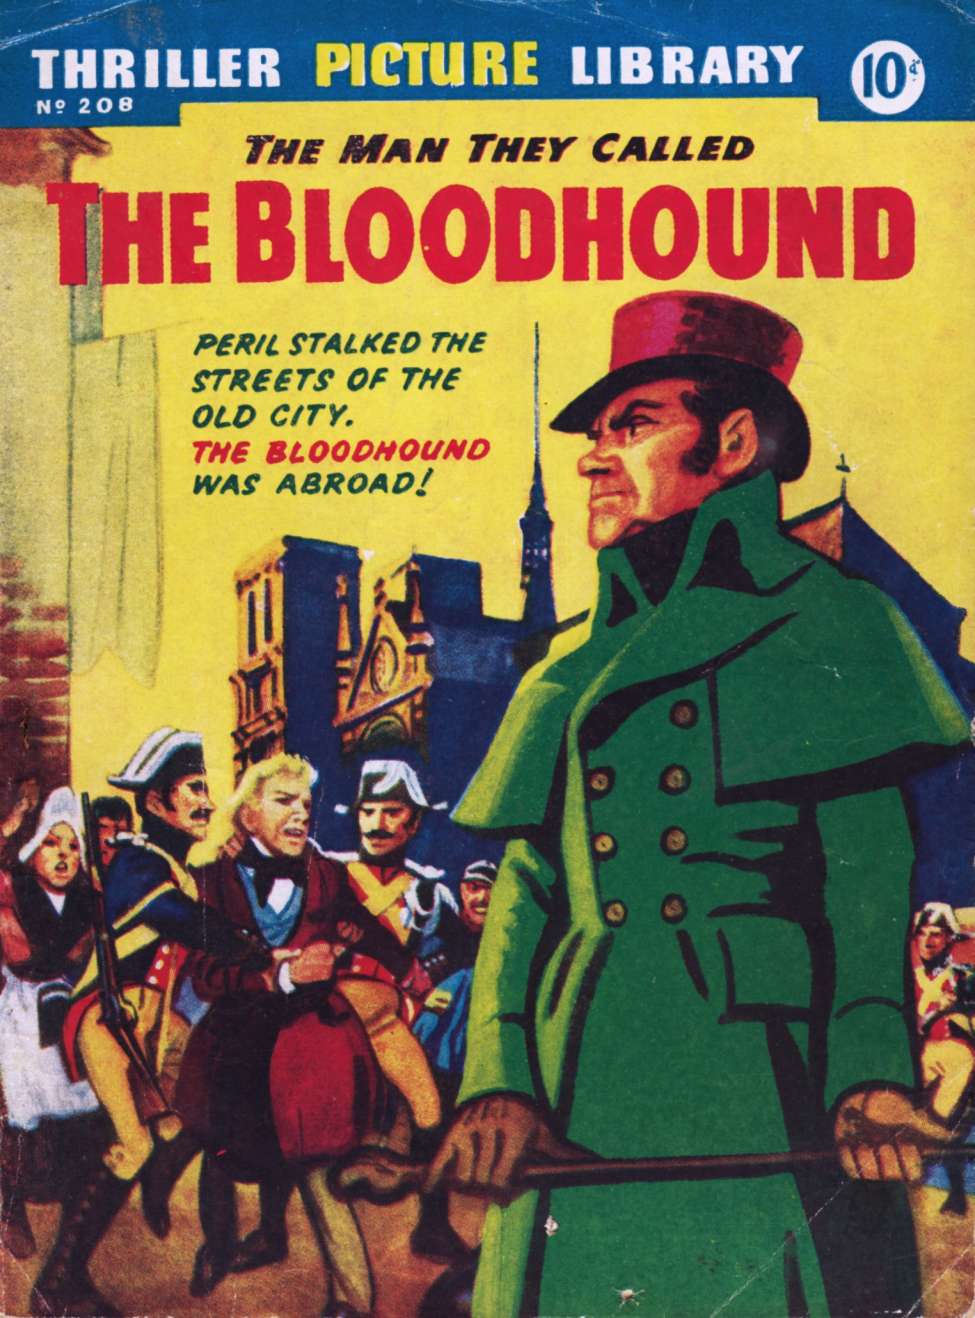 Book Cover For Thriller Picture Library 208 - The Man They Called the Bloodhound